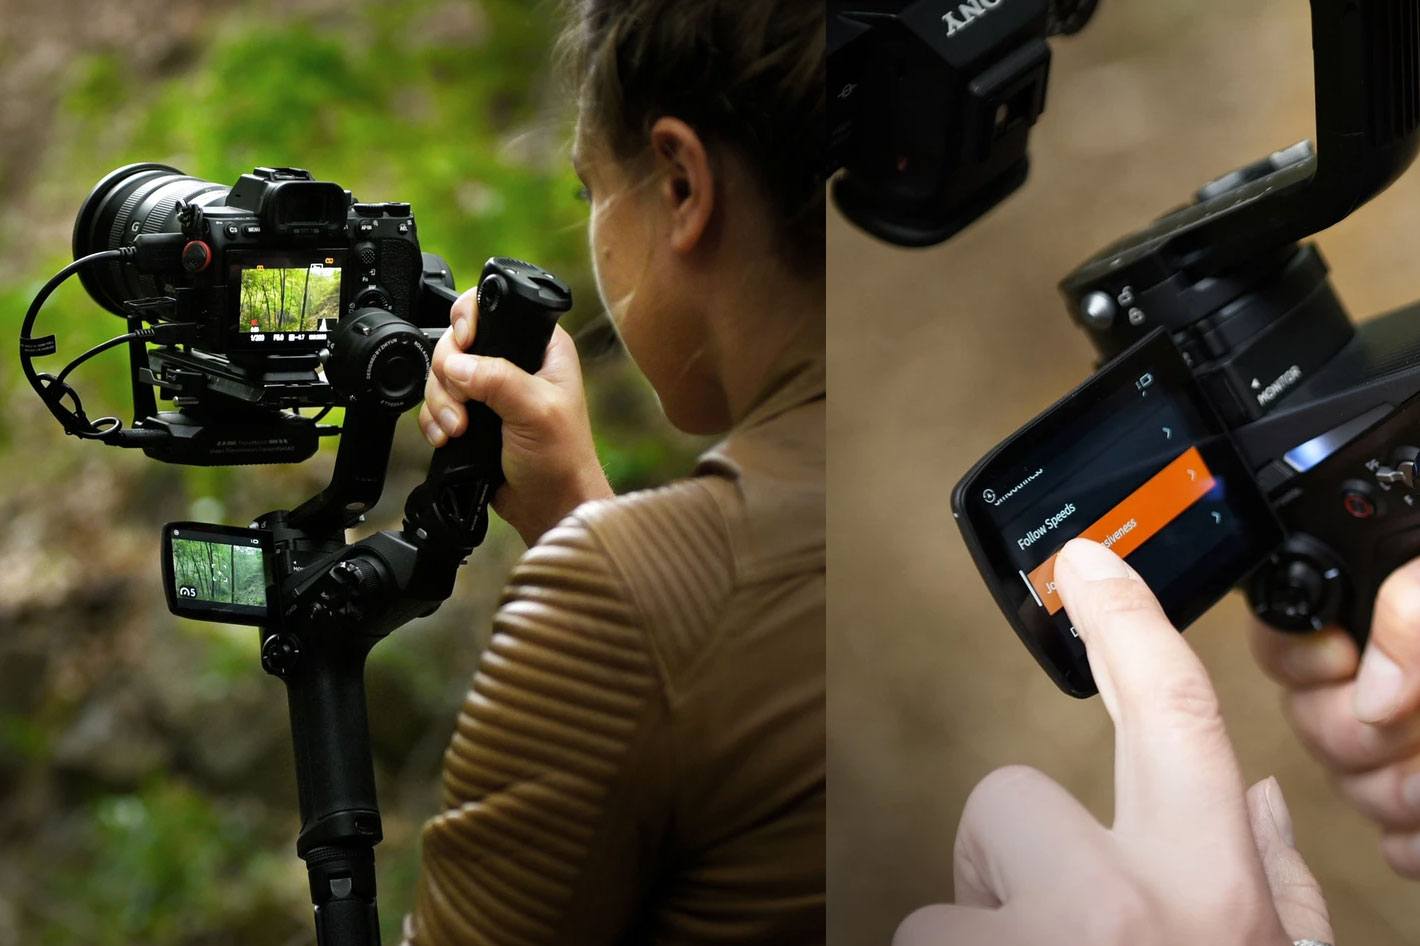 WEEBILL 2: the first gimbal with a touchscreen command centre